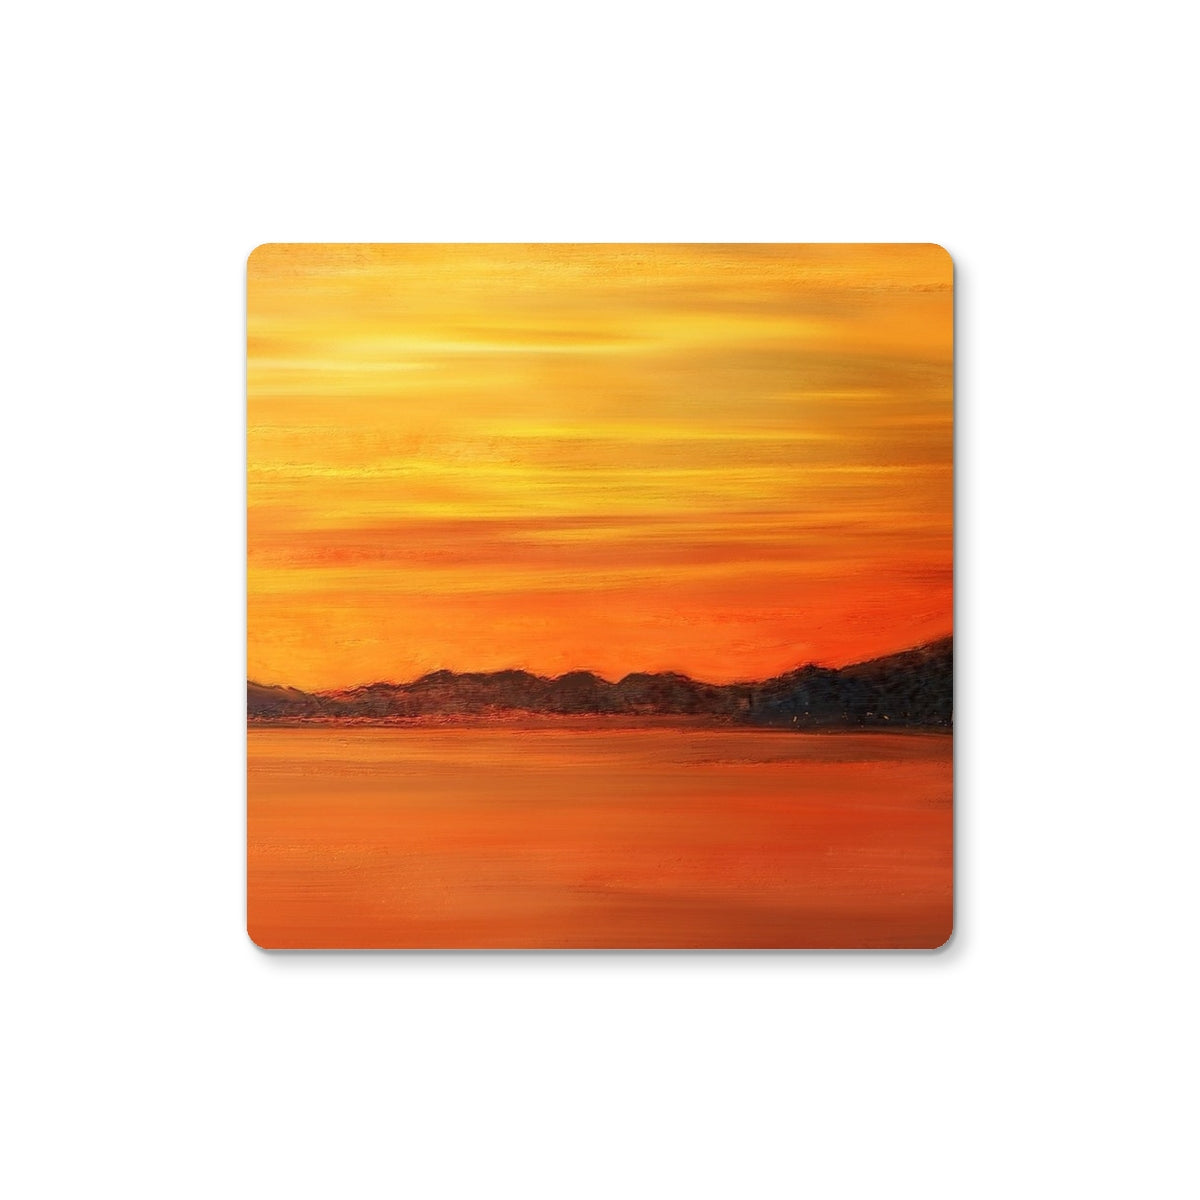 Loch Fyne Sunset Art Gifts Coaster-Coasters-Scottish Lochs & Mountains Art Gallery-2 Coasters-Paintings, Prints, Homeware, Art Gifts From Scotland By Scottish Artist Kevin Hunter